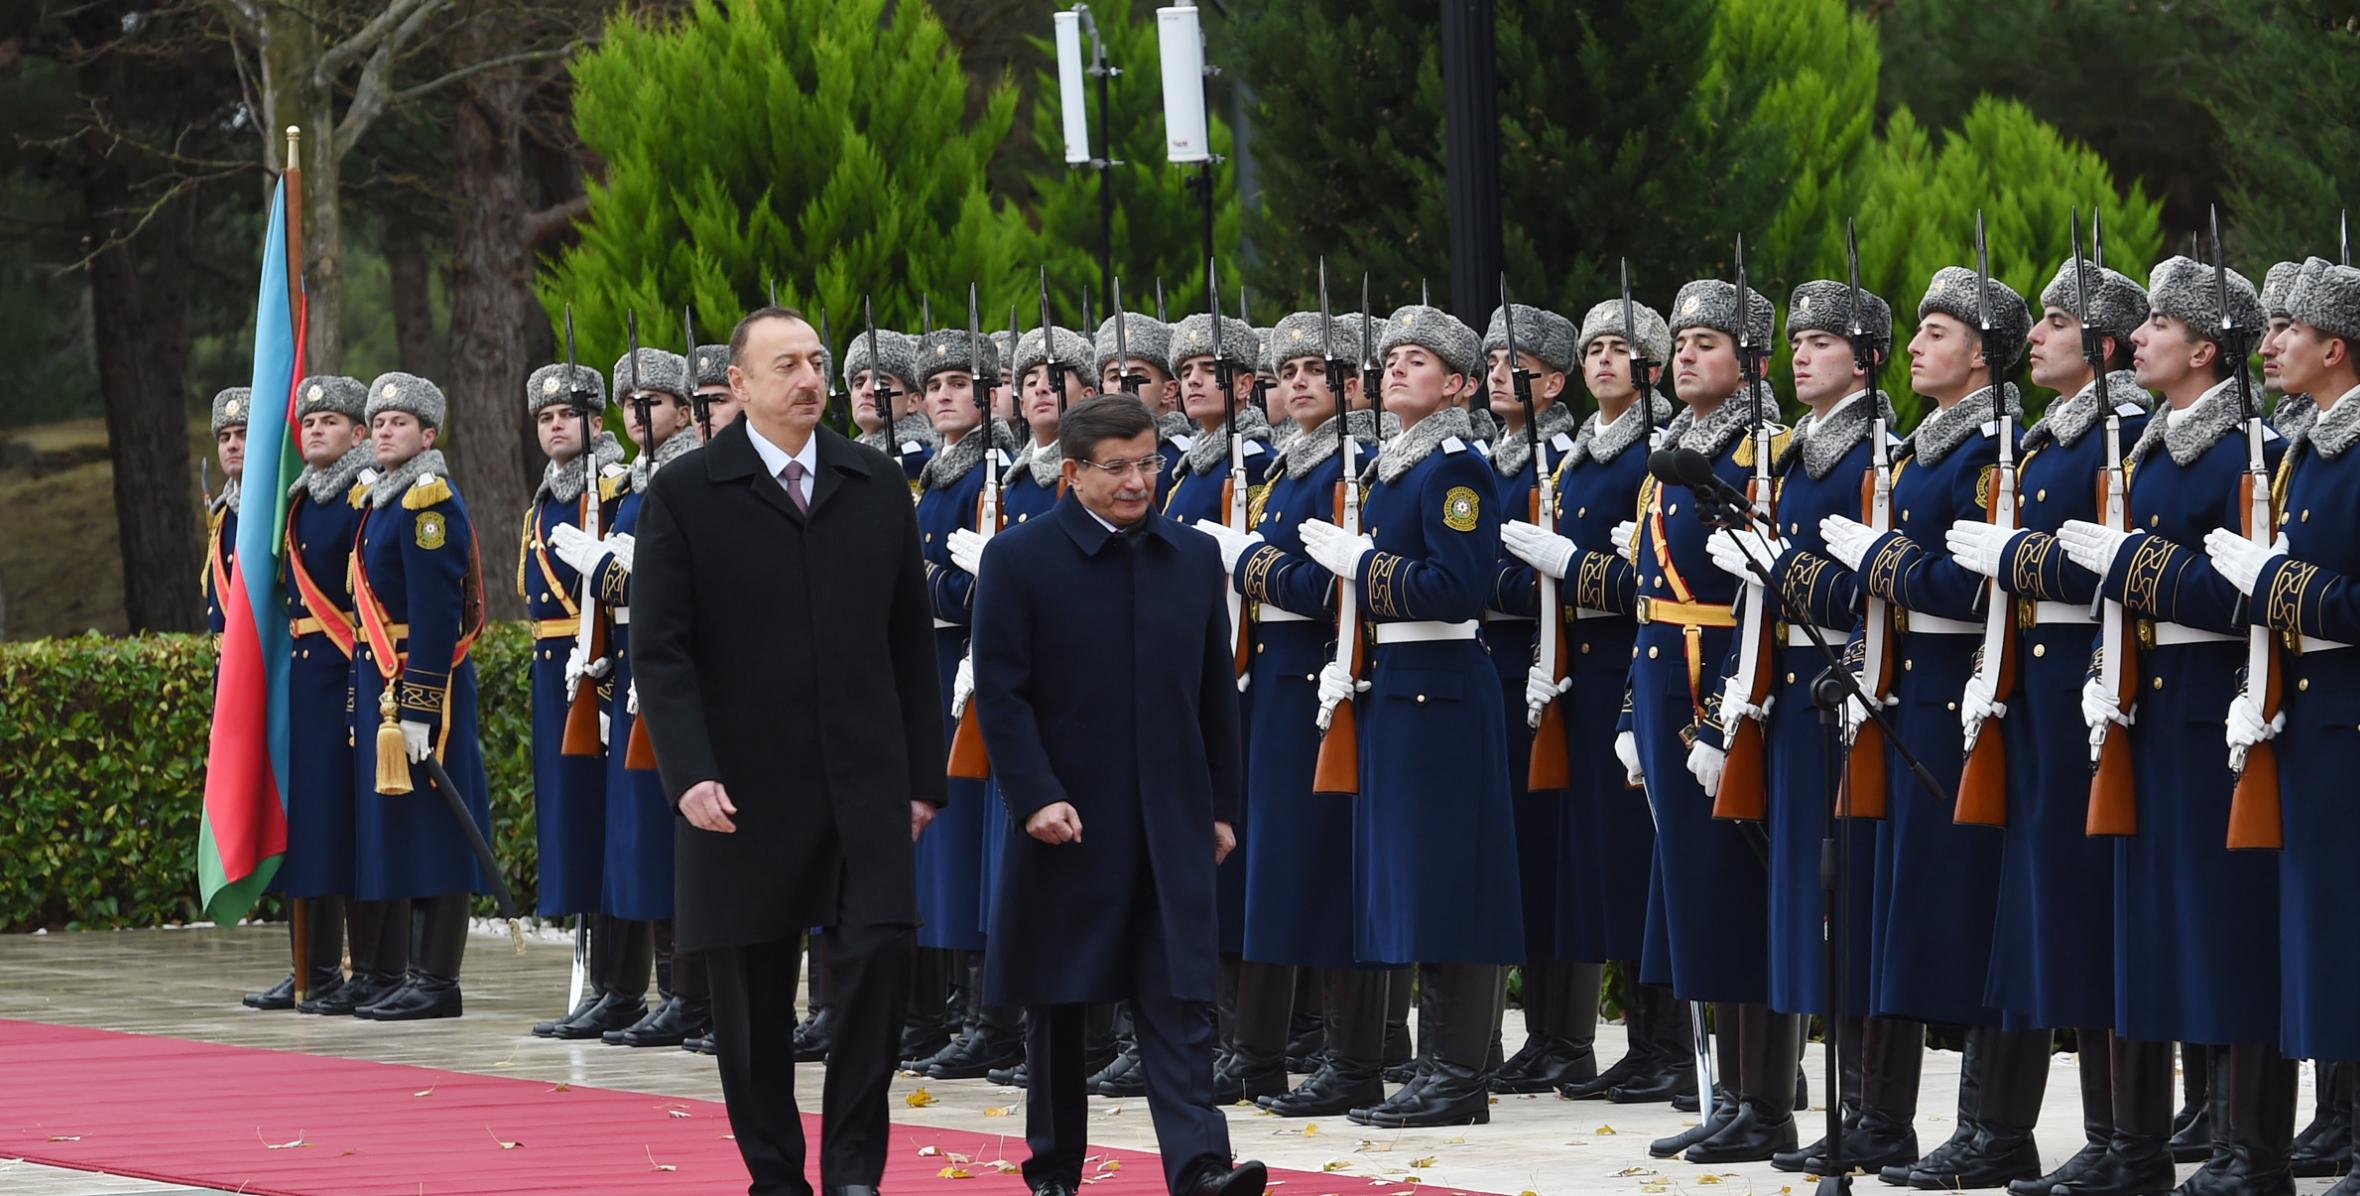 Official welcoming ceremony for Prime Minister of the Republic of Turkey Ahmet Davutoglu was held